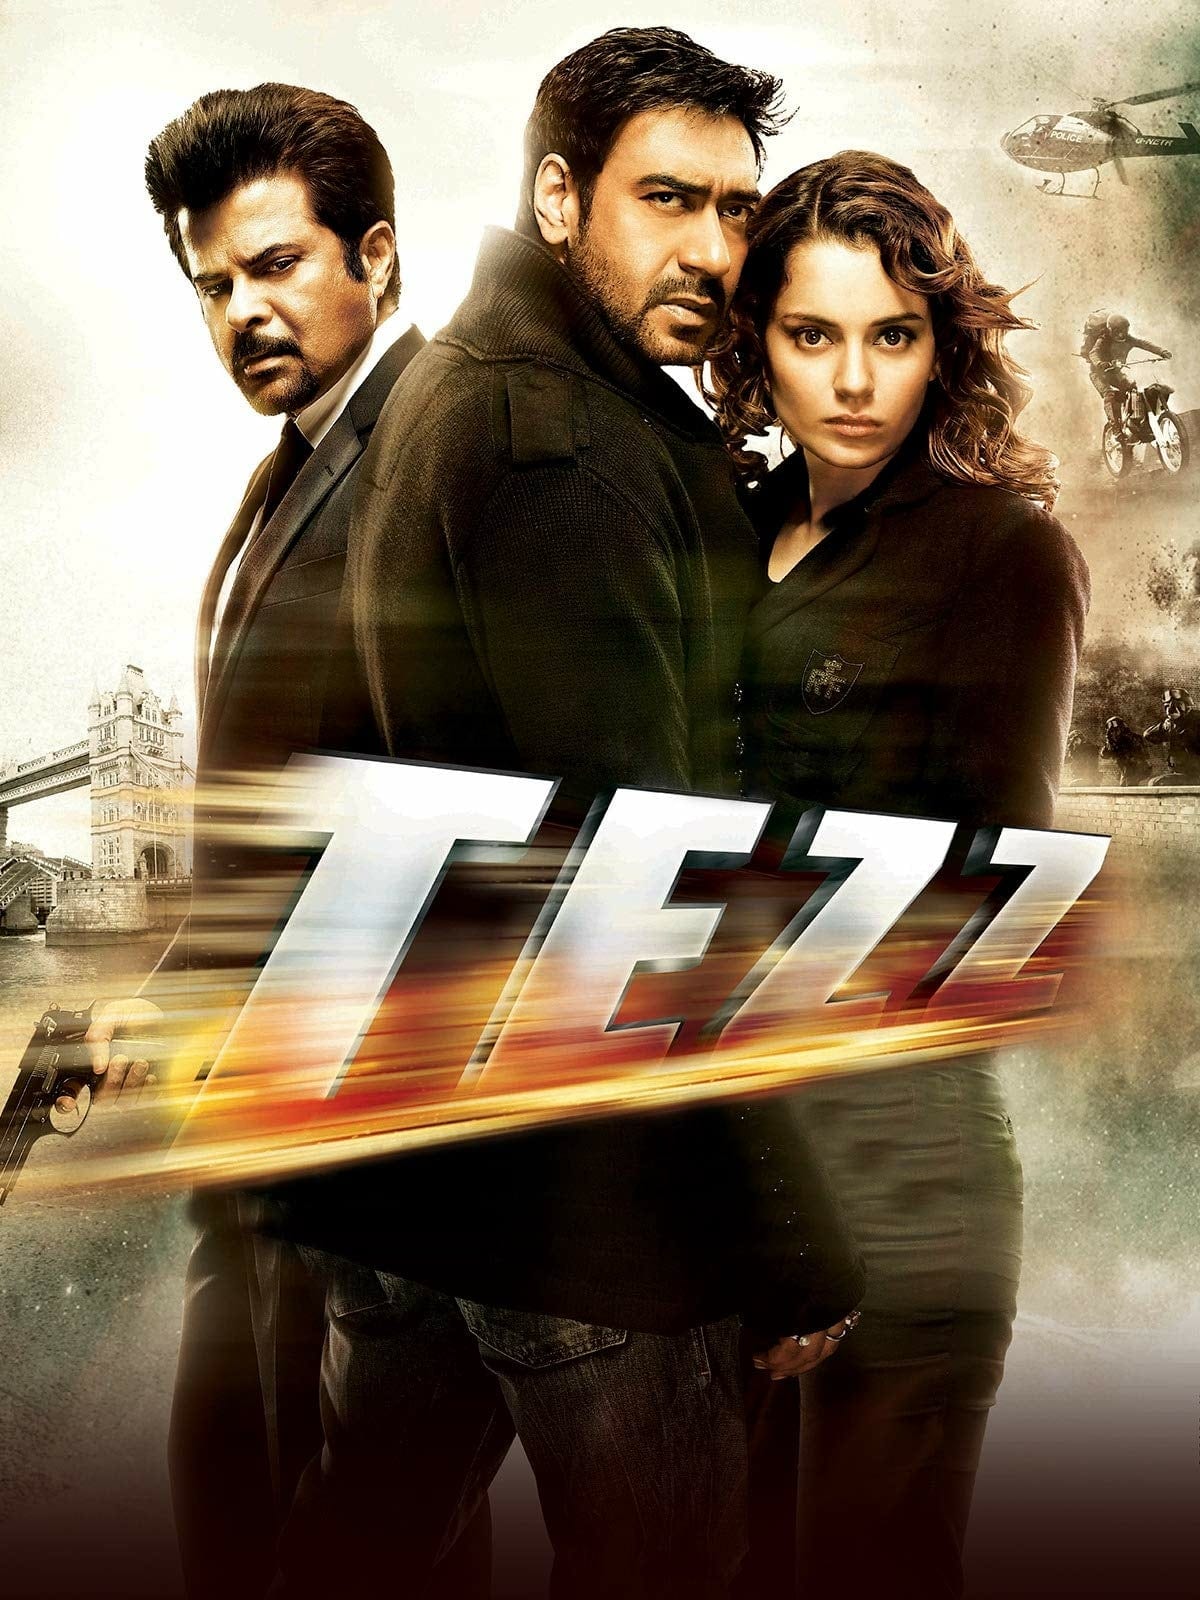 Poster for the movie "Tezz"